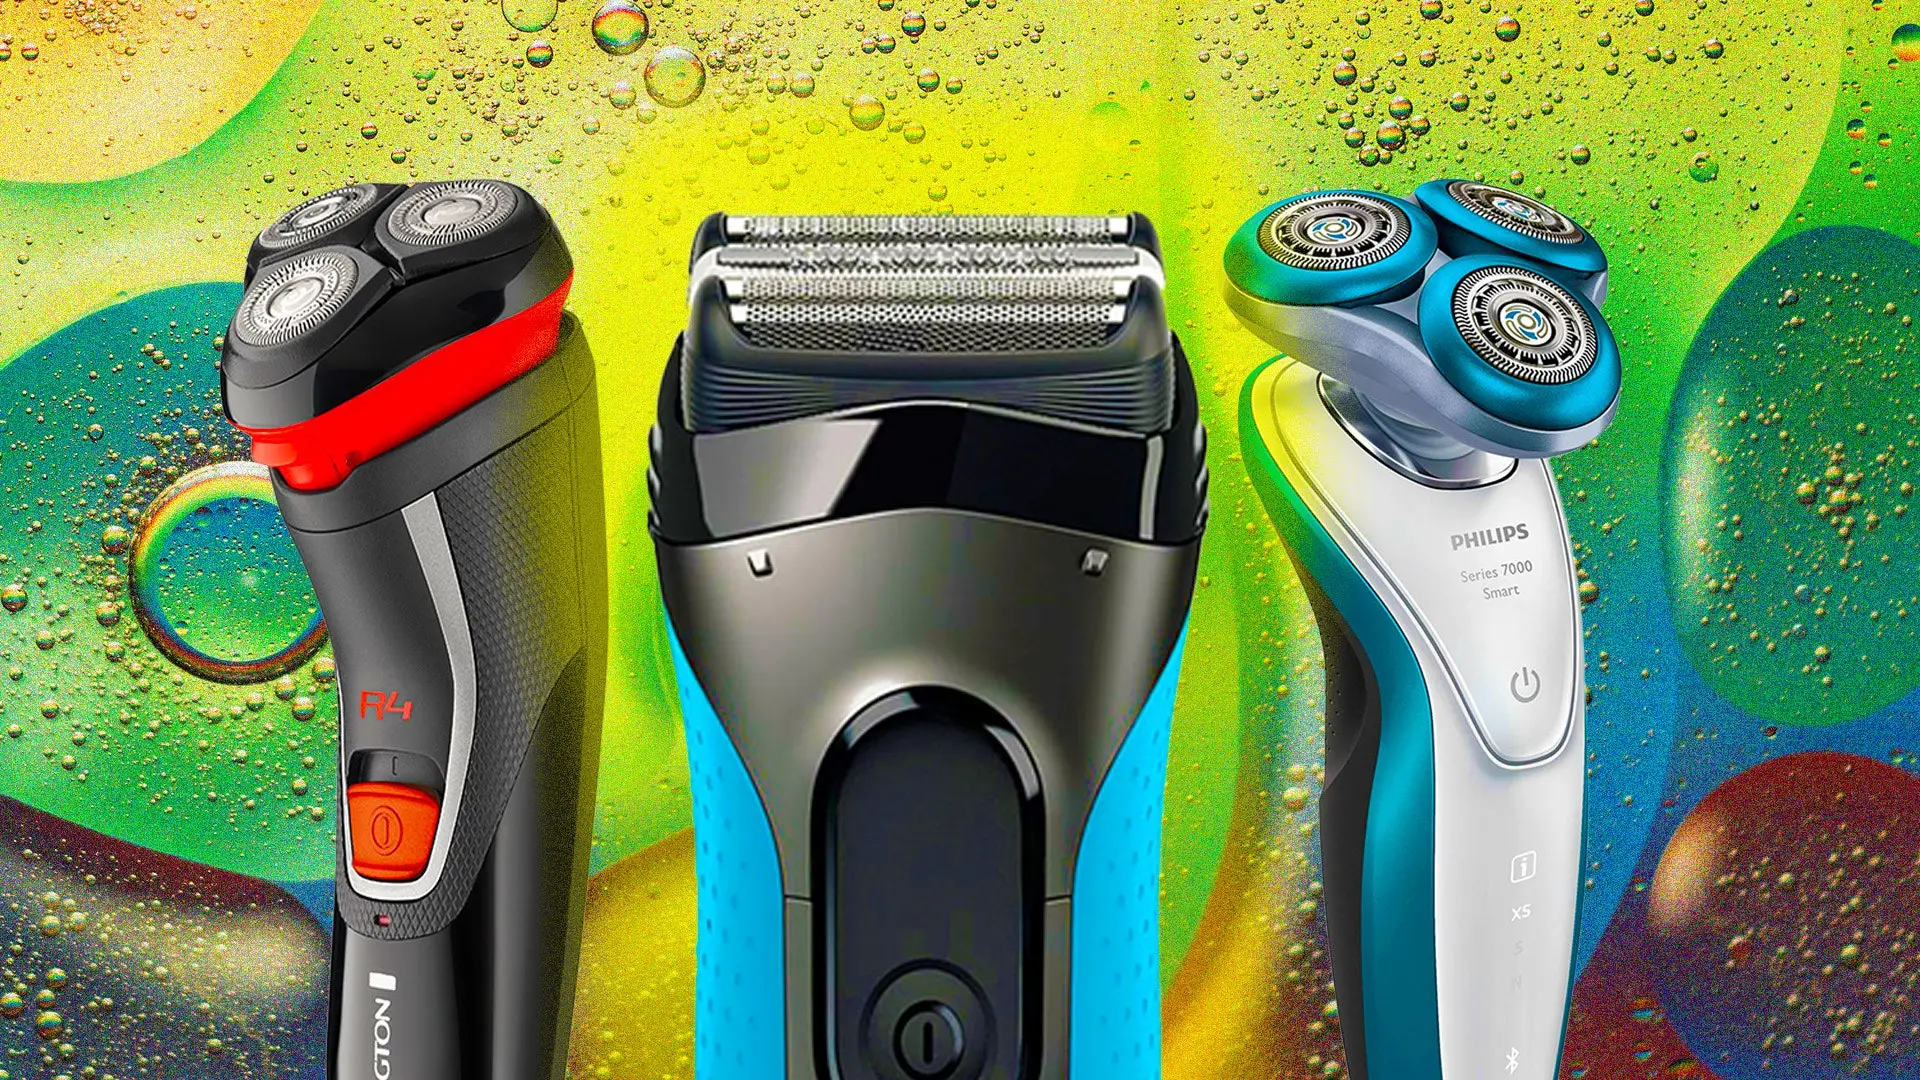 Foil Shaver Or Rotary Shaver, Which Is Better?